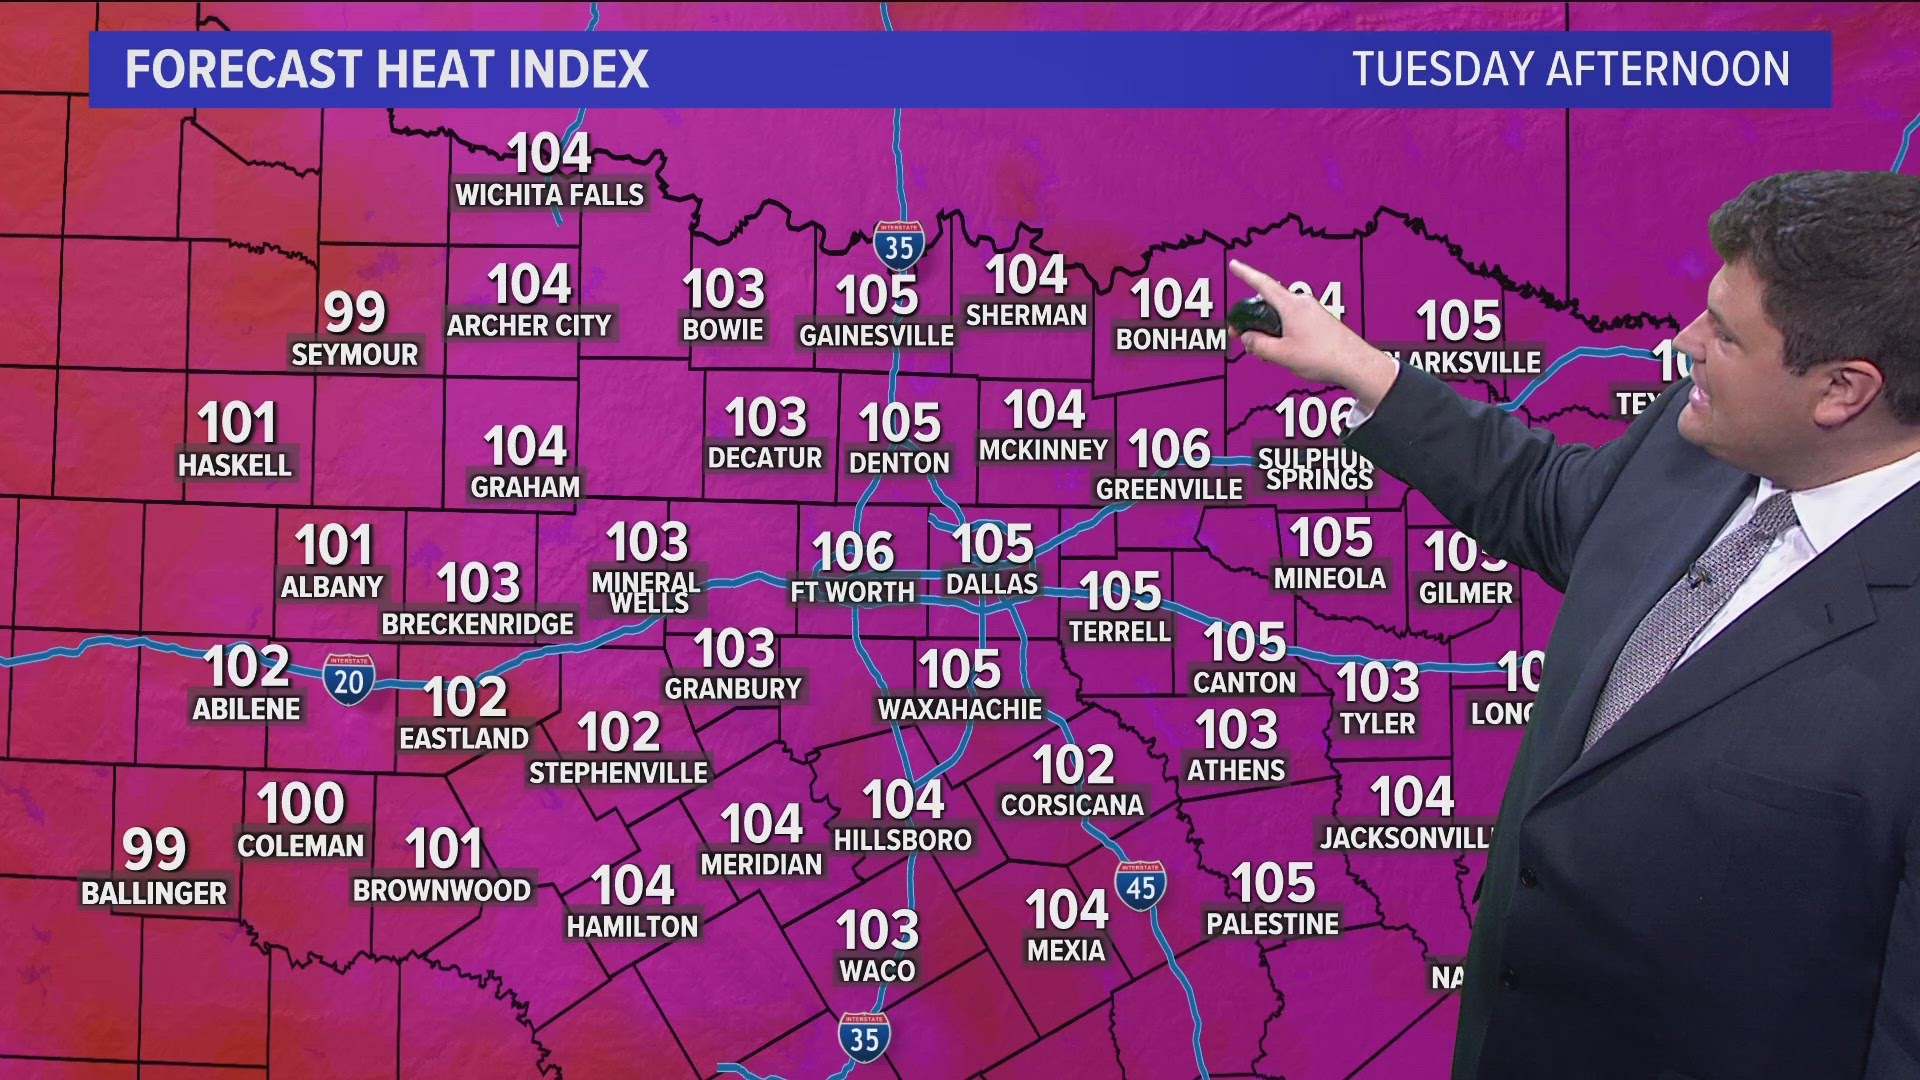 North Texas hit 100 degrees Sunday, and from here on out, temperatures are only going up. WFAA tells you how to stay safe during the dog days of summer.